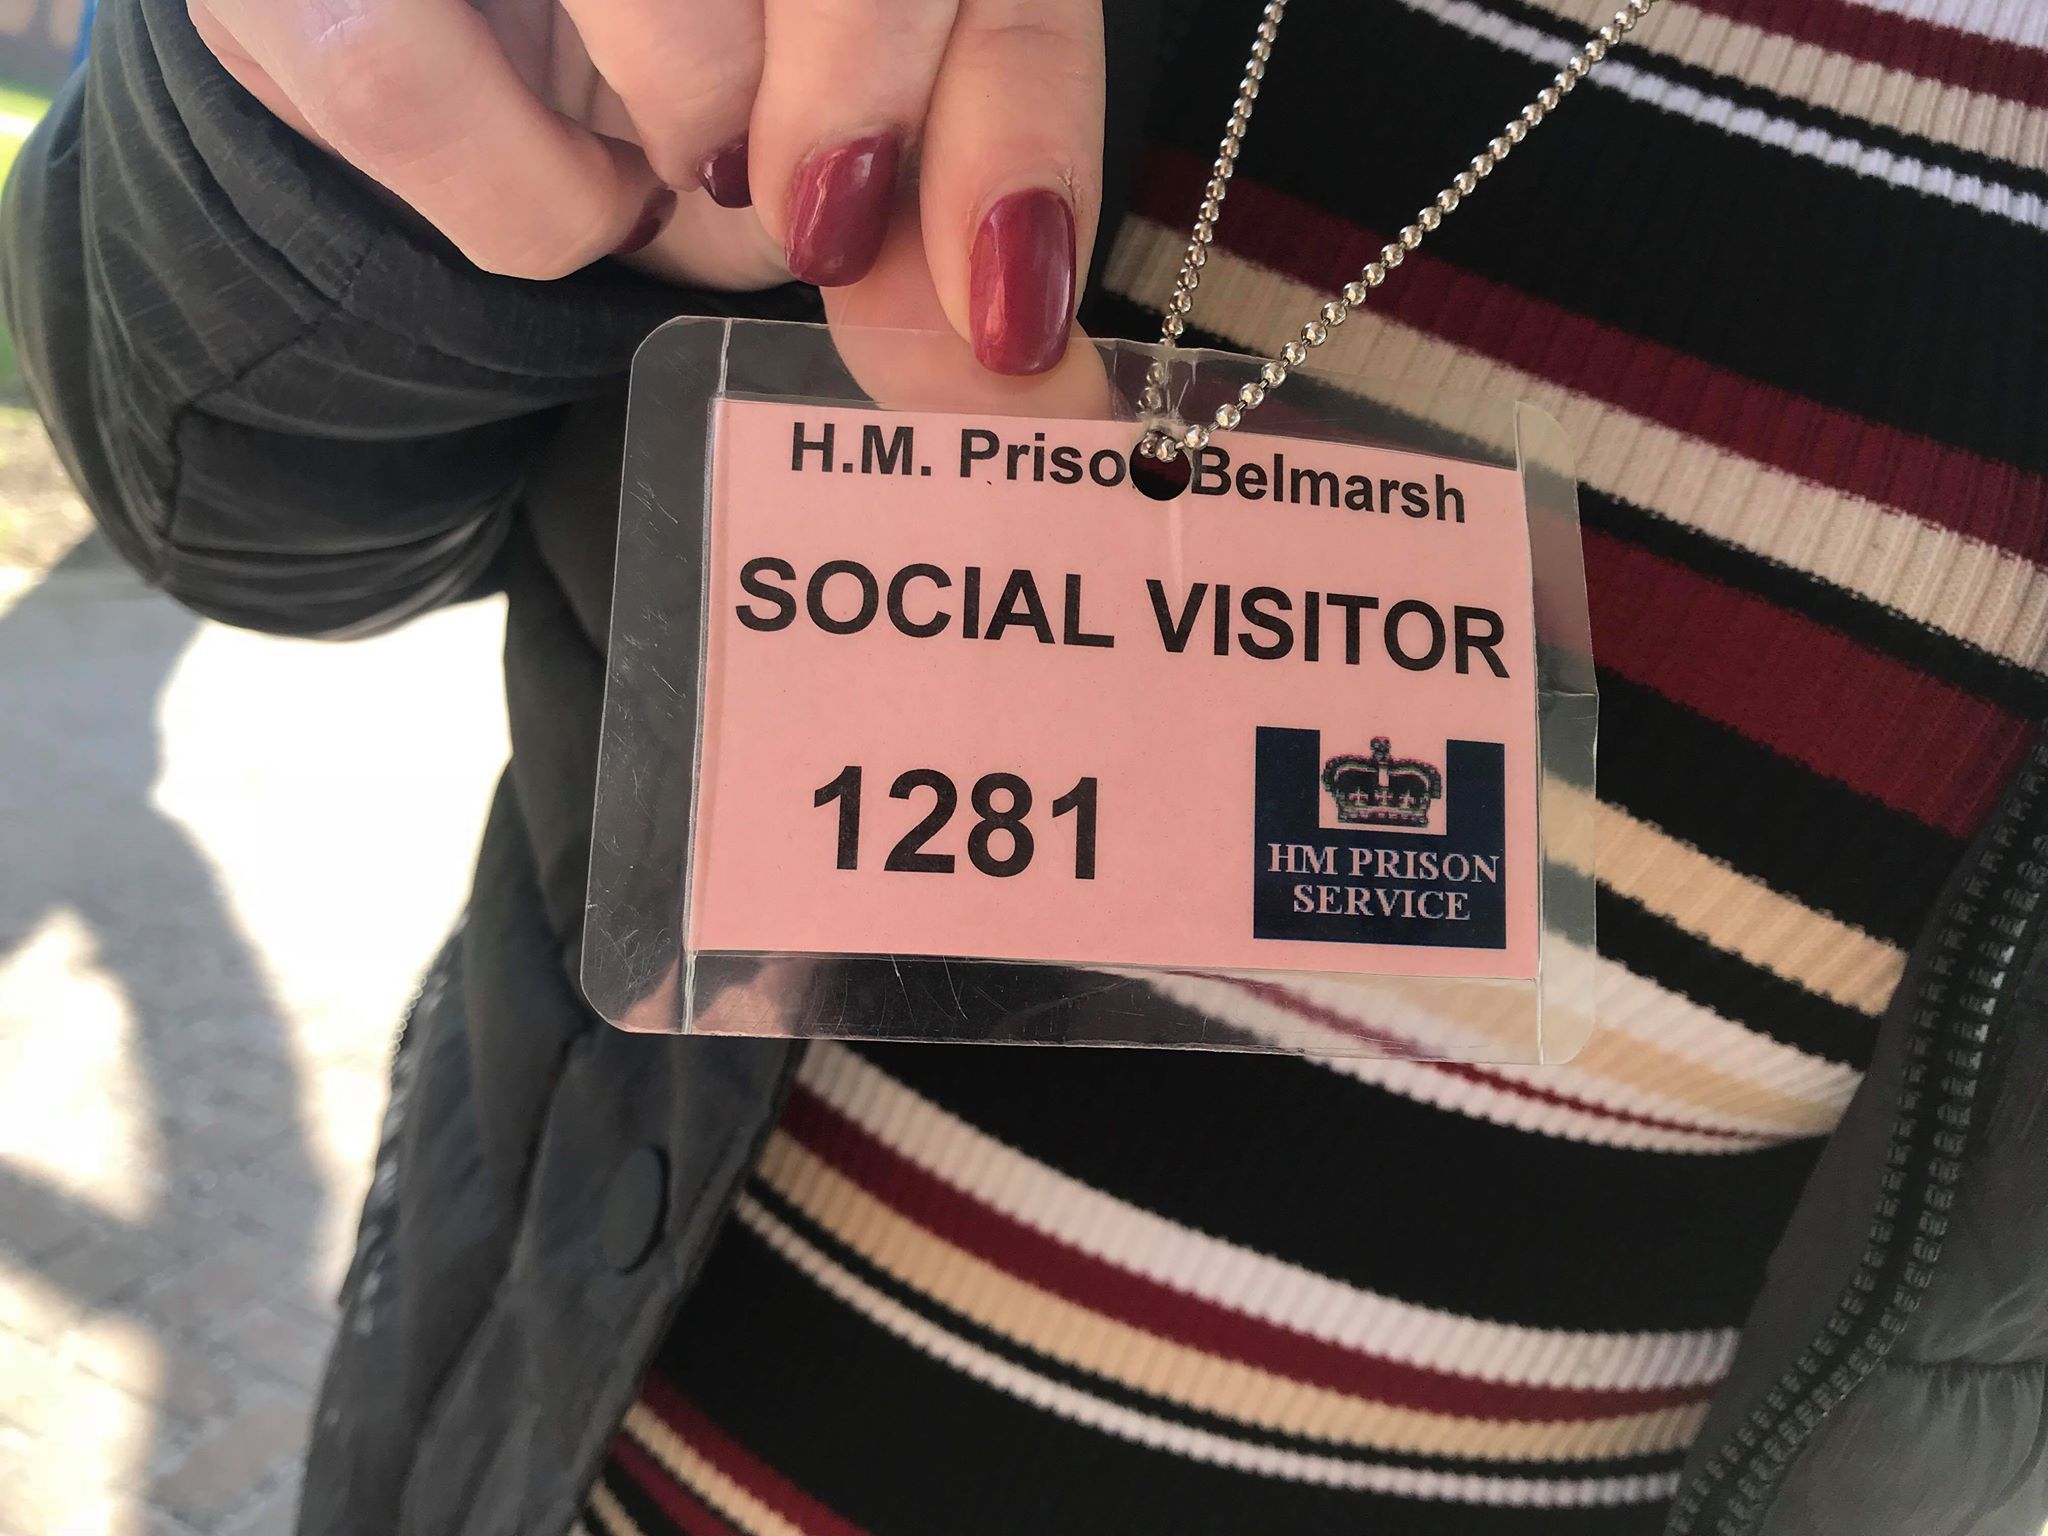 Before being searched for prison contraband, visitors to H.M.P Belmarsh are given a "social visitor" tag. Image by Paul LeBlanc. United Kingdom, 2018.